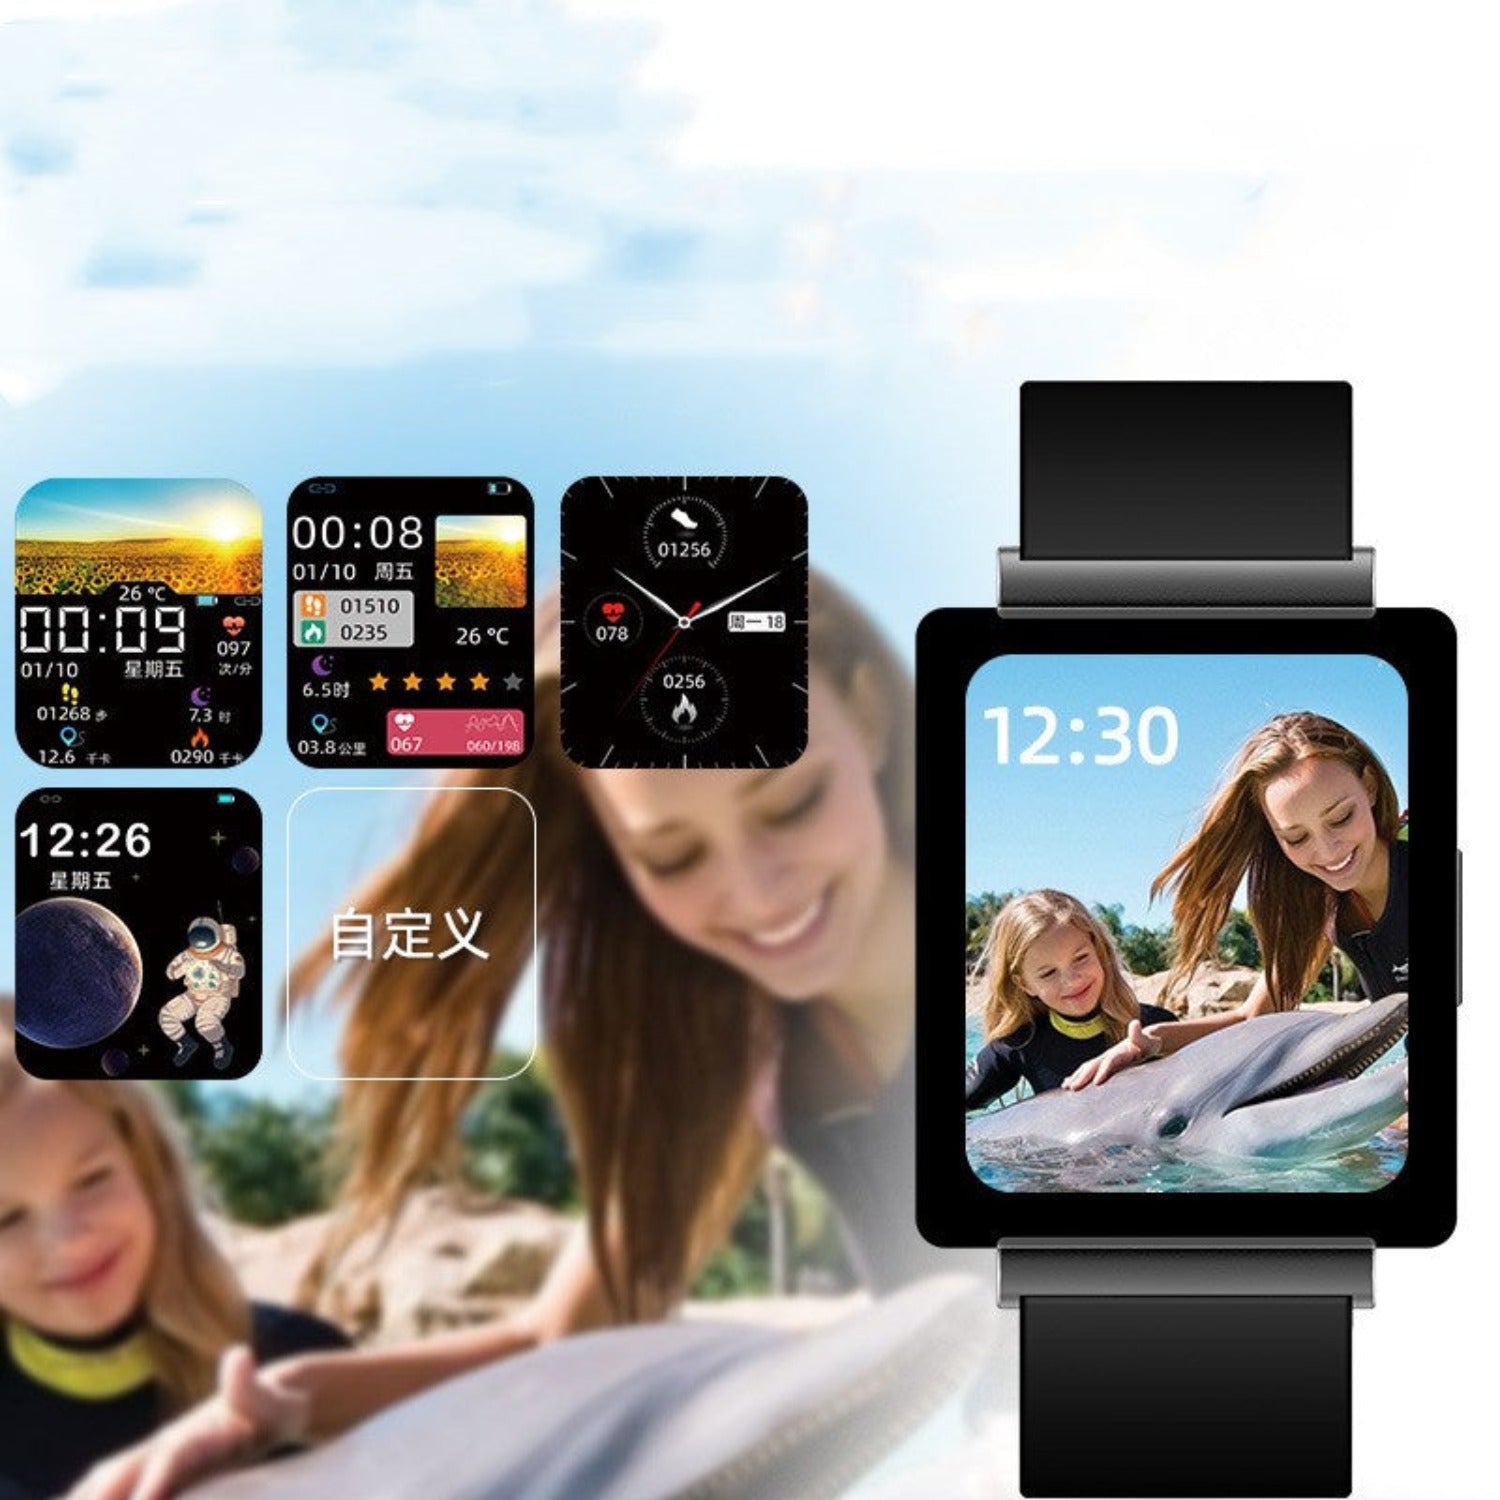 Smart Watch: Comprehensive Health Monitoring with Body Temperature, Blood Sugar, and Heart Rate Tracking LA ROSE BEAUTY